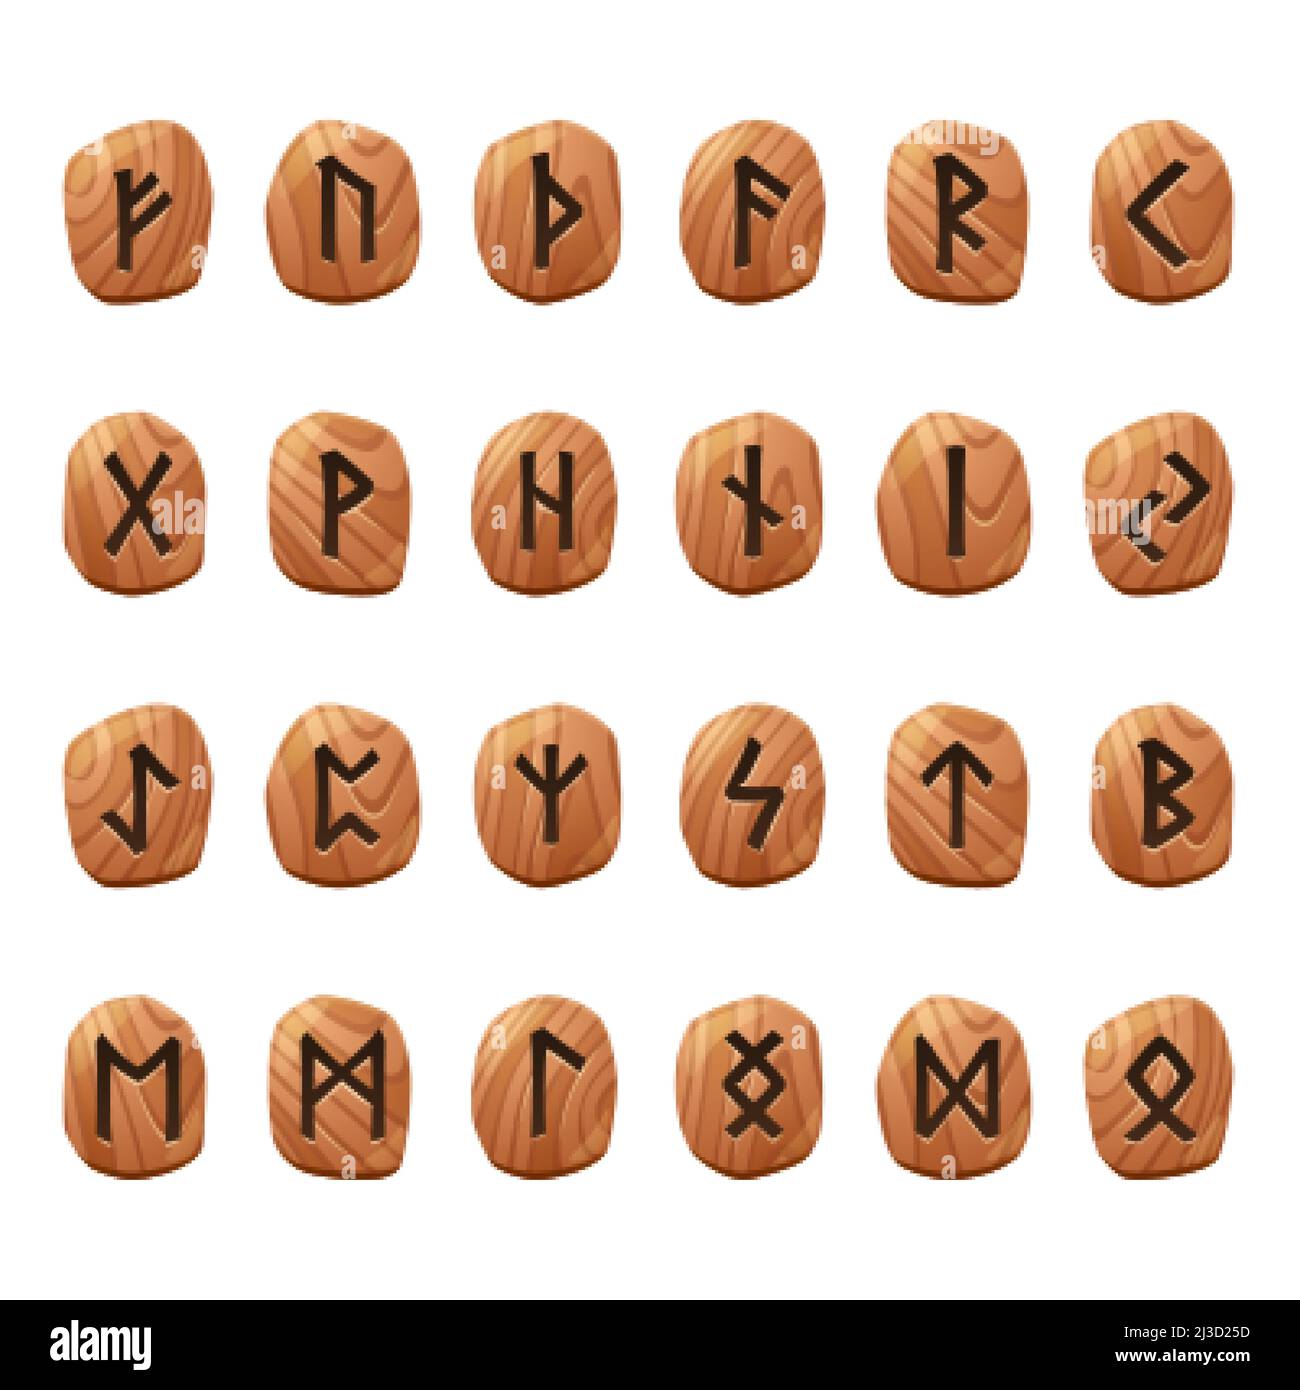 Set of game runes, nordic ancient alphabet, viking celtic futark symbols engraved on wooden pieces. Esoteric occult signs, mystic ui or gui design ele Stock Vector